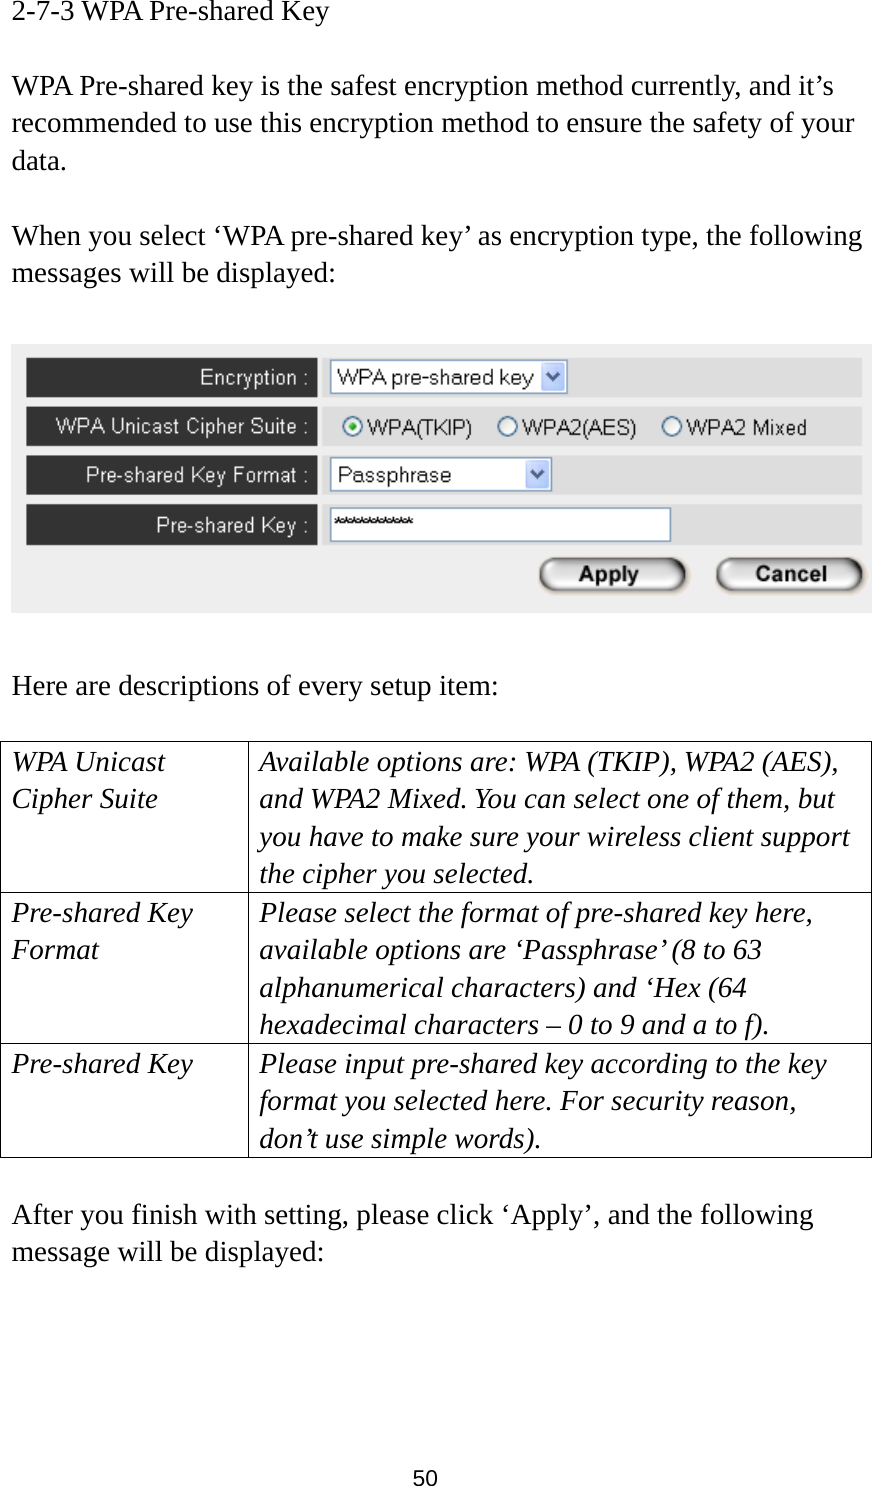  50 2-7-3 WPA Pre-shared Key  WPA Pre-shared key is the safest encryption method currently, and it’s recommended to use this encryption method to ensure the safety of your data.  When you select ‘WPA pre-shared key’ as encryption type, the following messages will be displayed:    Here are descriptions of every setup item:  WPA Unicast Cipher Suite  Available options are: WPA (TKIP), WPA2 (AES), and WPA2 Mixed. You can select one of them, but you have to make sure your wireless client support the cipher you selected. Pre-shared Key Format Please select the format of pre-shared key here, available options are ‘Passphrase’ (8 to 63 alphanumerical characters) and ‘Hex (64 hexadecimal characters – 0 to 9 and a to f). Pre-shared Key Please input pre-shared key according to the key format you selected here. For security reason, don’t use simple words).  After you finish with setting, please click ‘Apply’, and the following message will be displayed:  